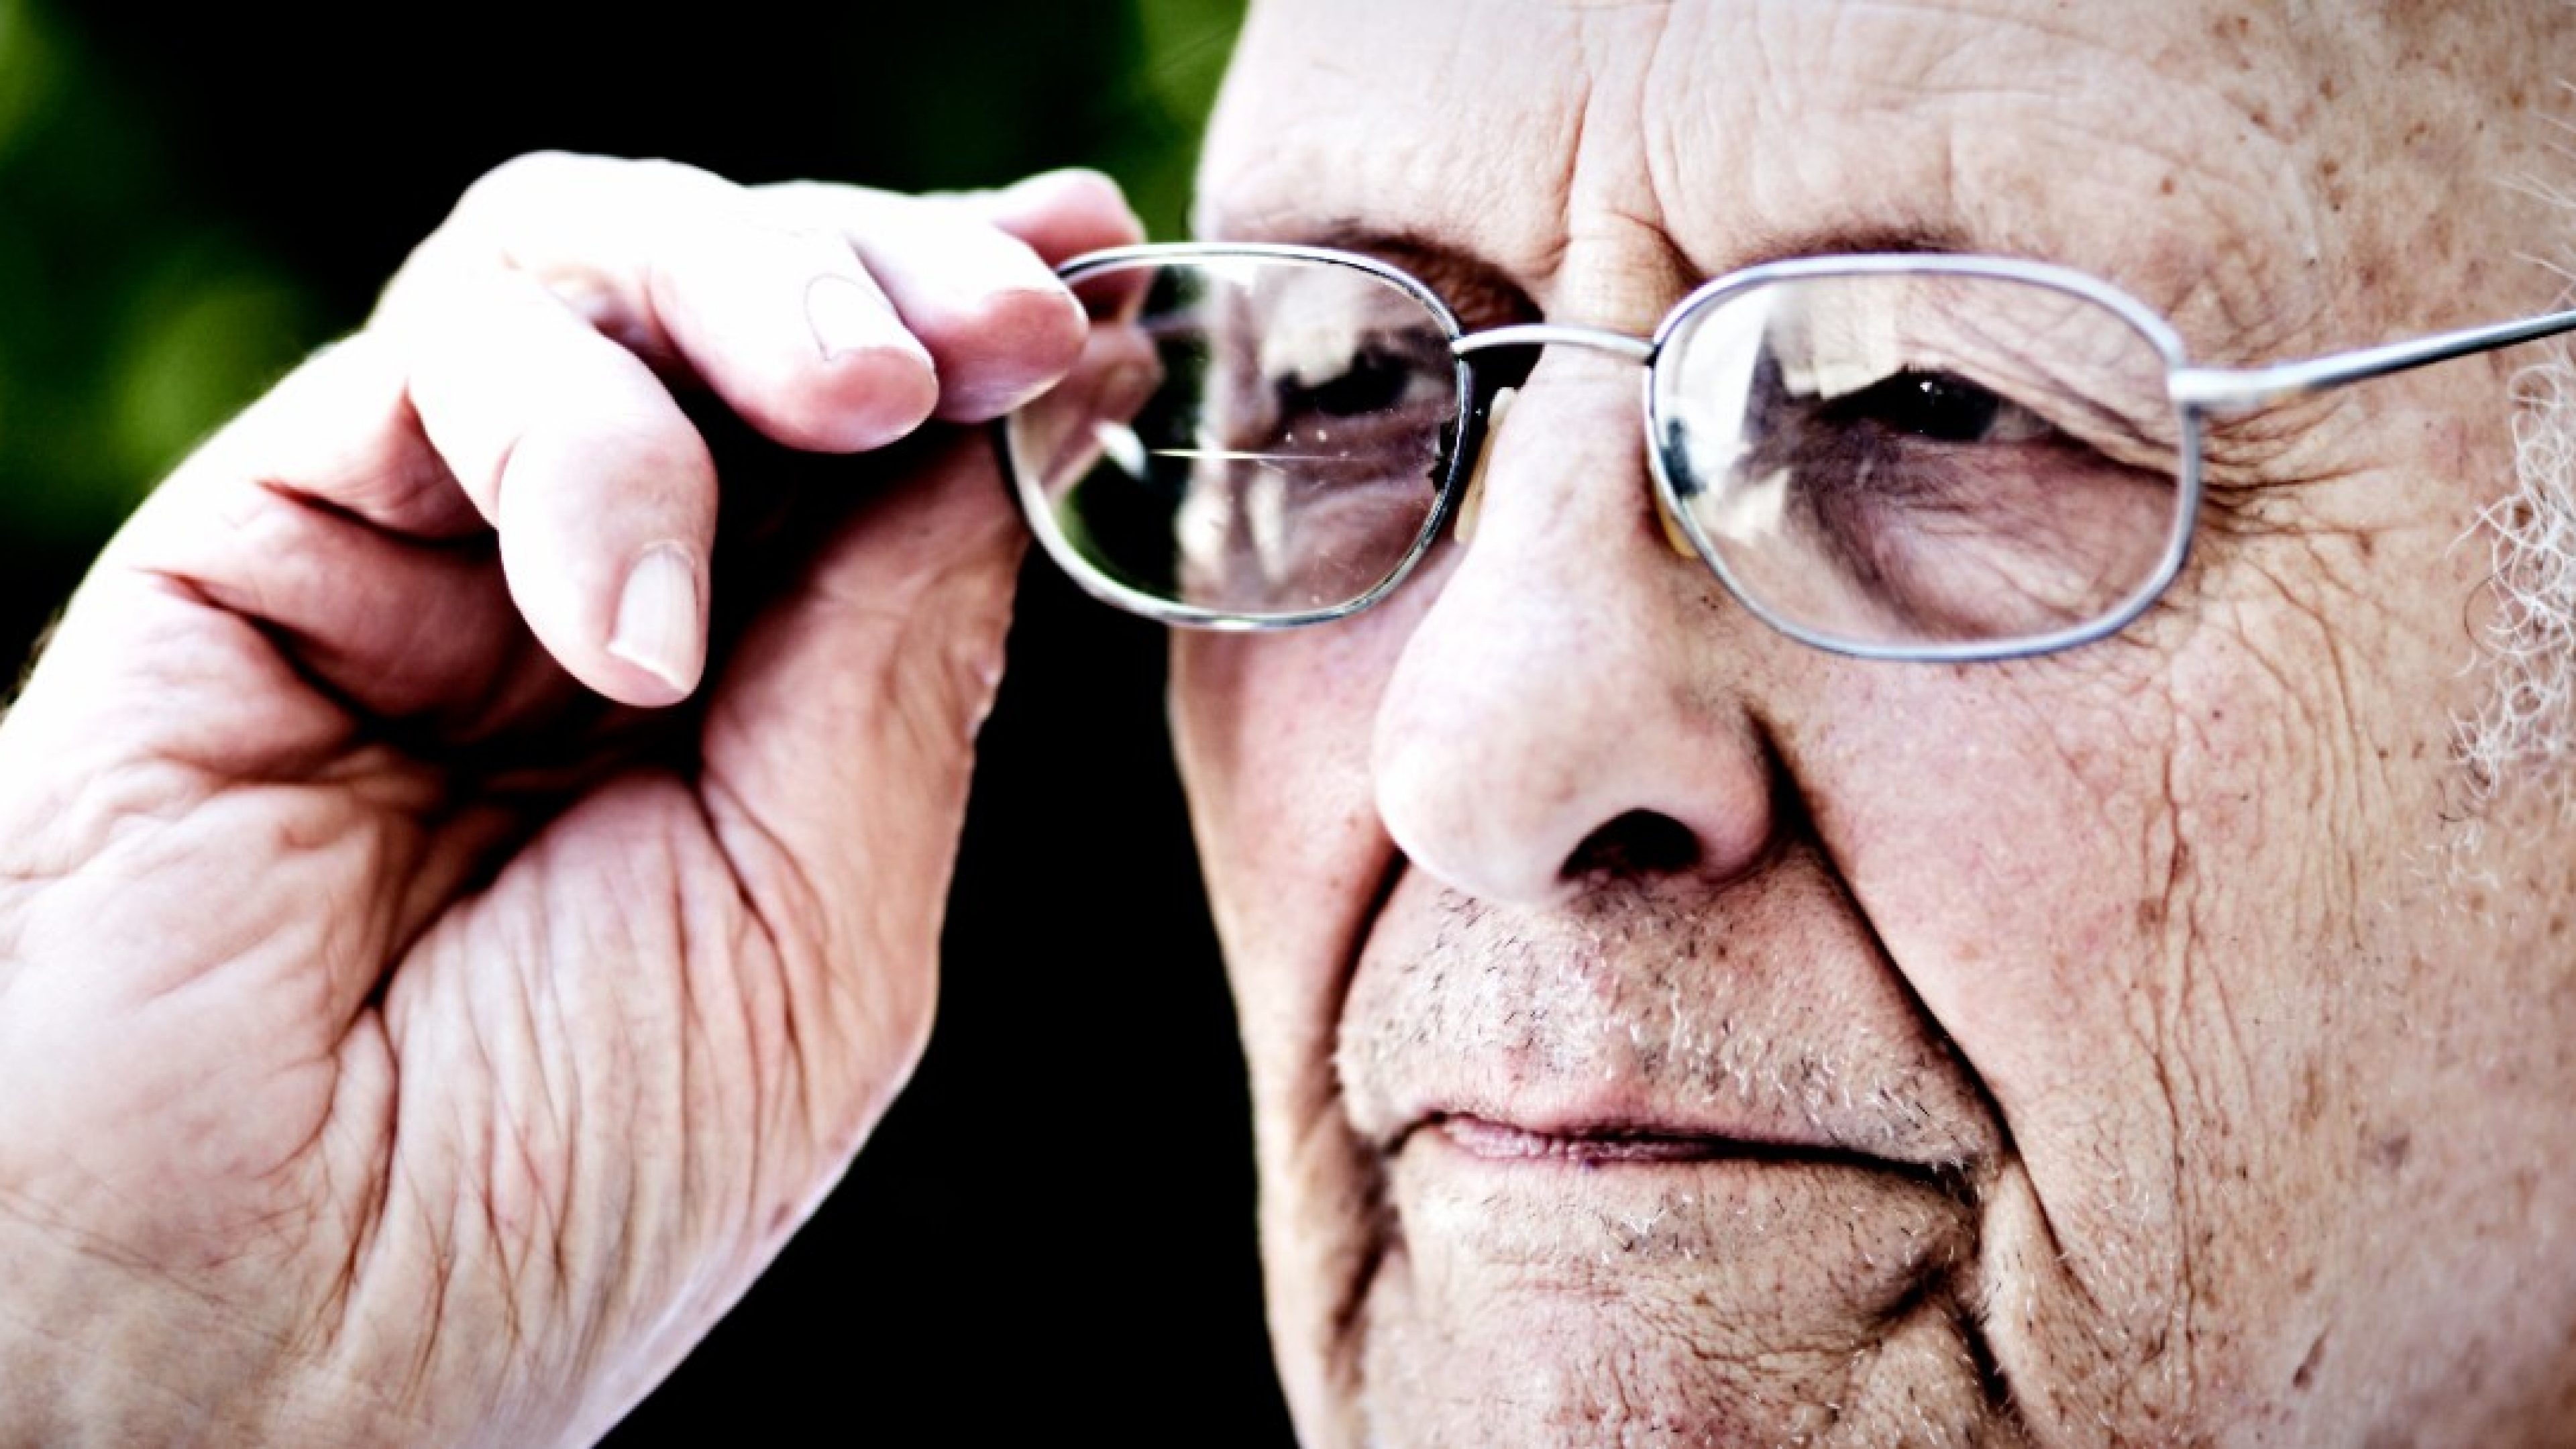 This 90 year old man adjusts his eyeglasses as he stands in his garden, looking serious.